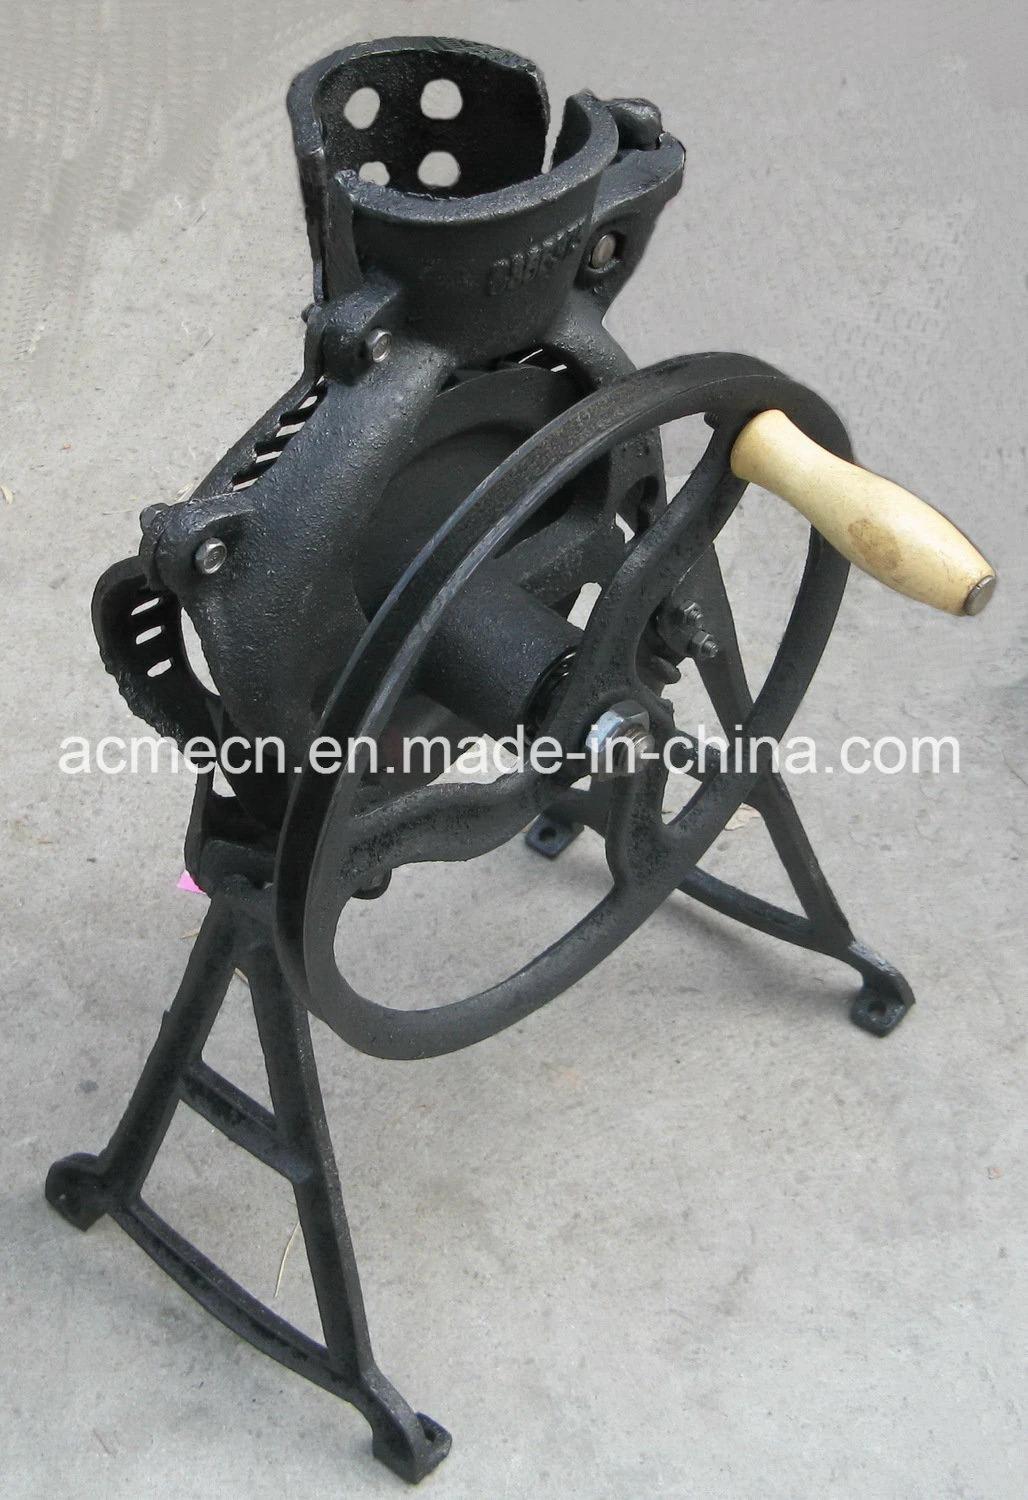 Manual and Small Maize Sheller Thresher by Hand Manual Corn Thresher